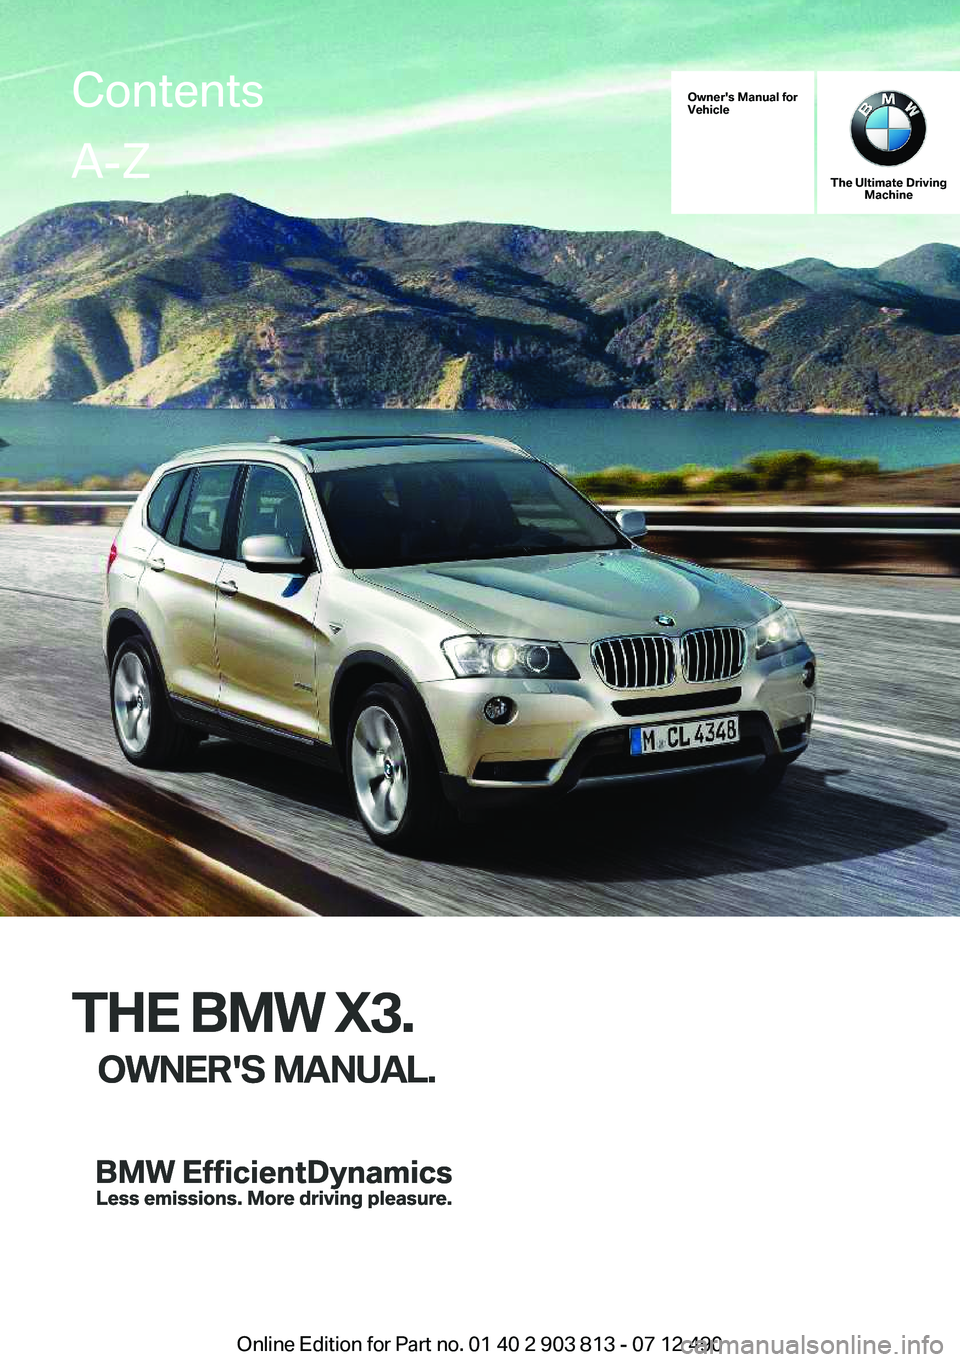 BMW X3 XDRIVE 35I 2013  Owners Manual Owner's Manual for
Vehicle
THE BMW X3.
OWNER'S MANUAL.
The Ultimate Driving Machine
THE BMW X3.
OWNER'S MANUAL.
ContentsA-Z
Online Edition for Part no. 01 40 2 903 813 - 07 12 490    